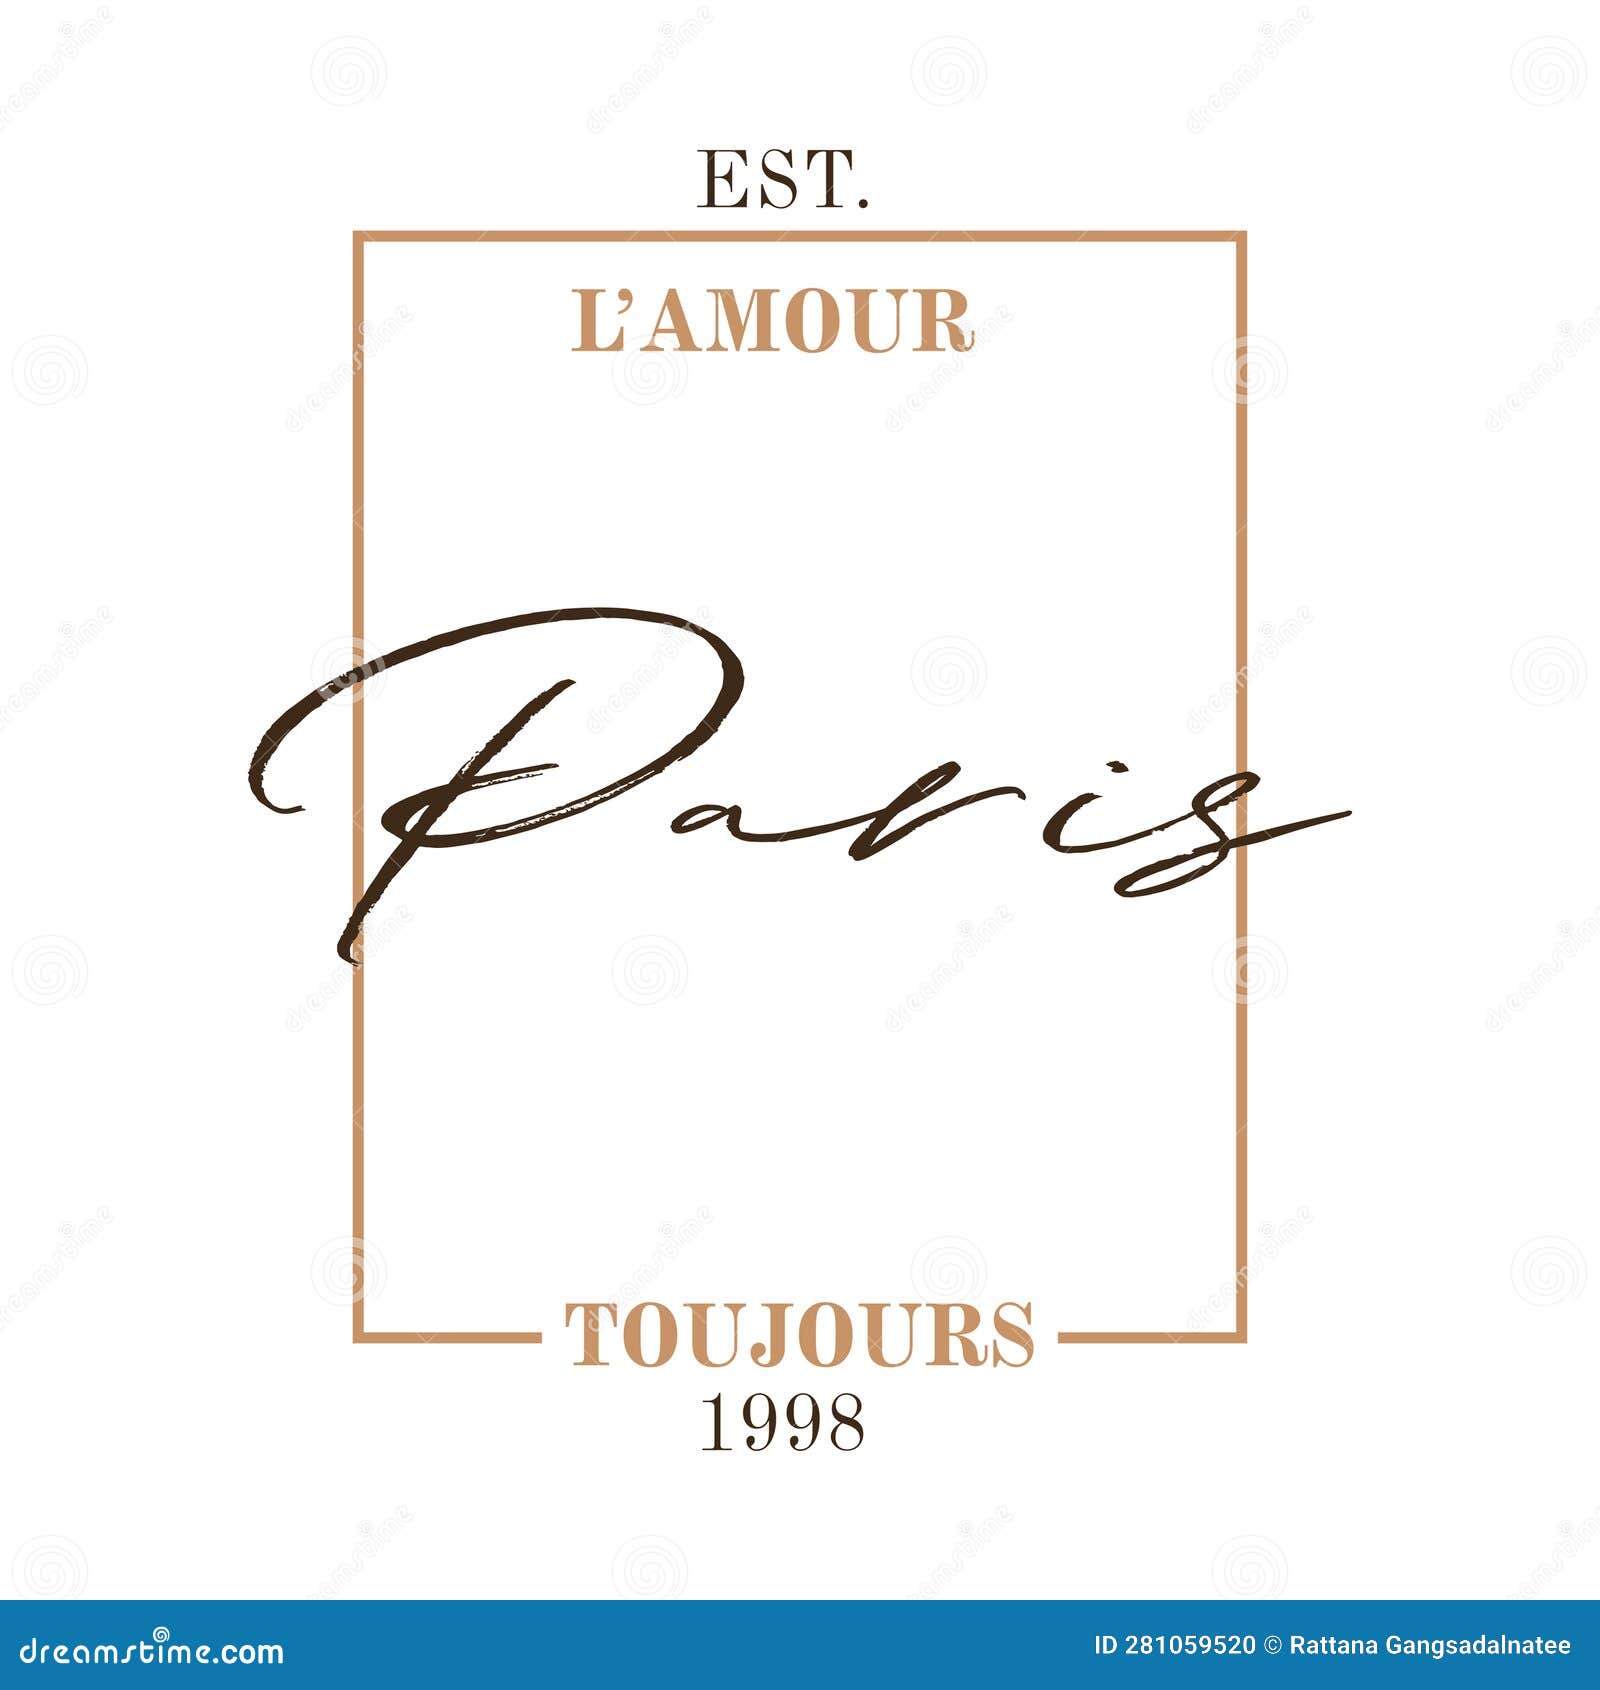 l'amour toujours paris, french means love always